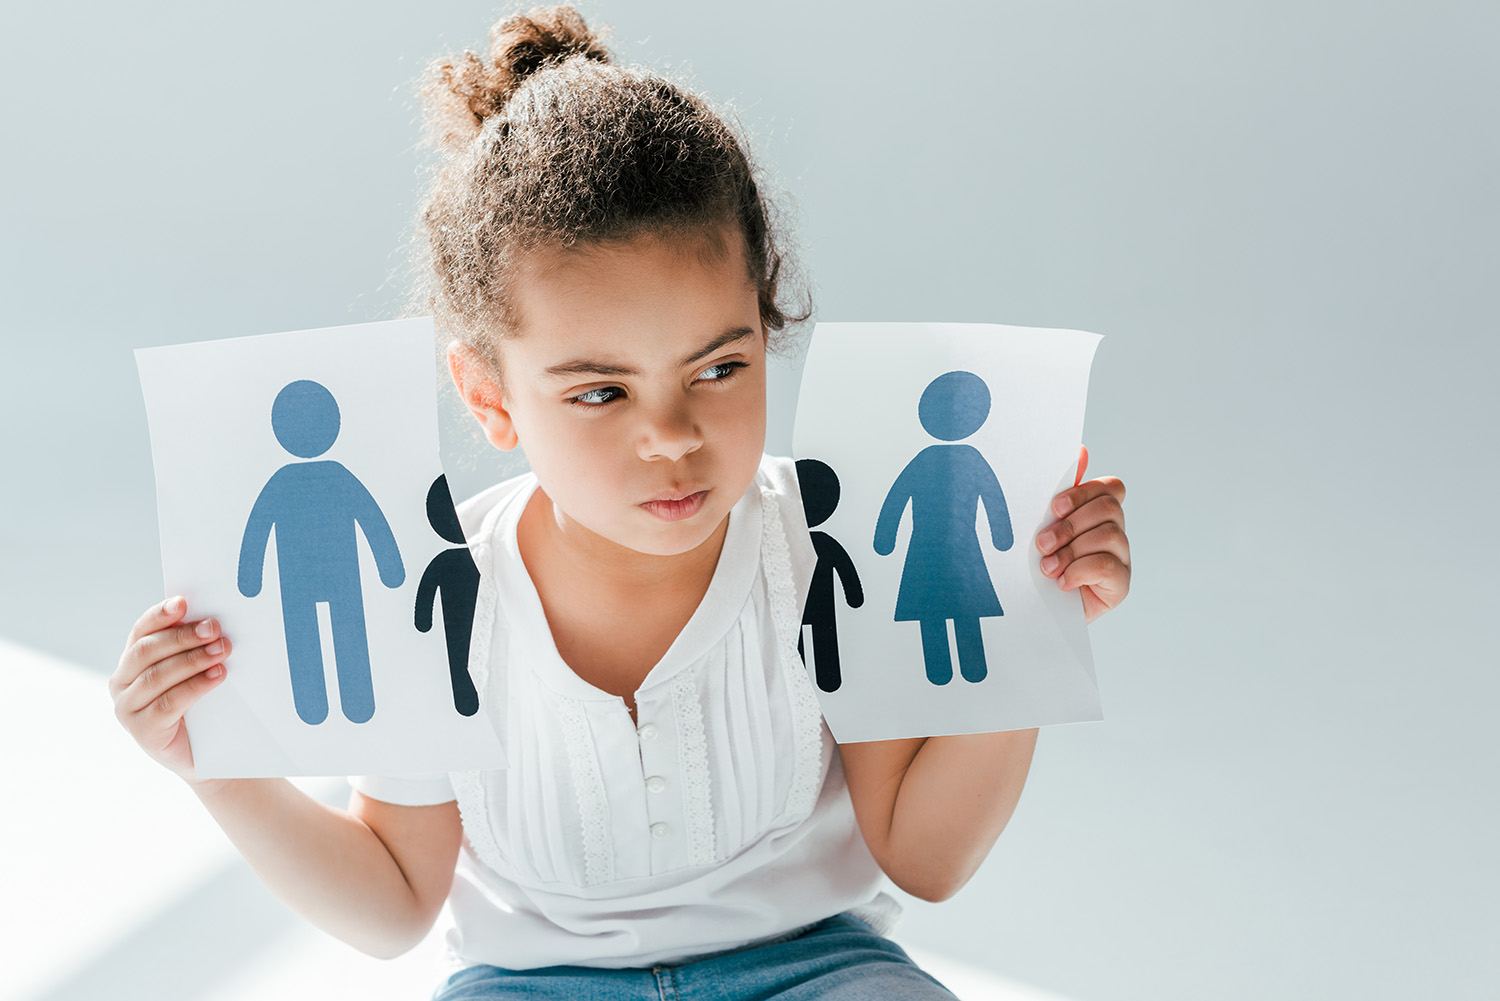 Child Custody and Divorce: What you should know.